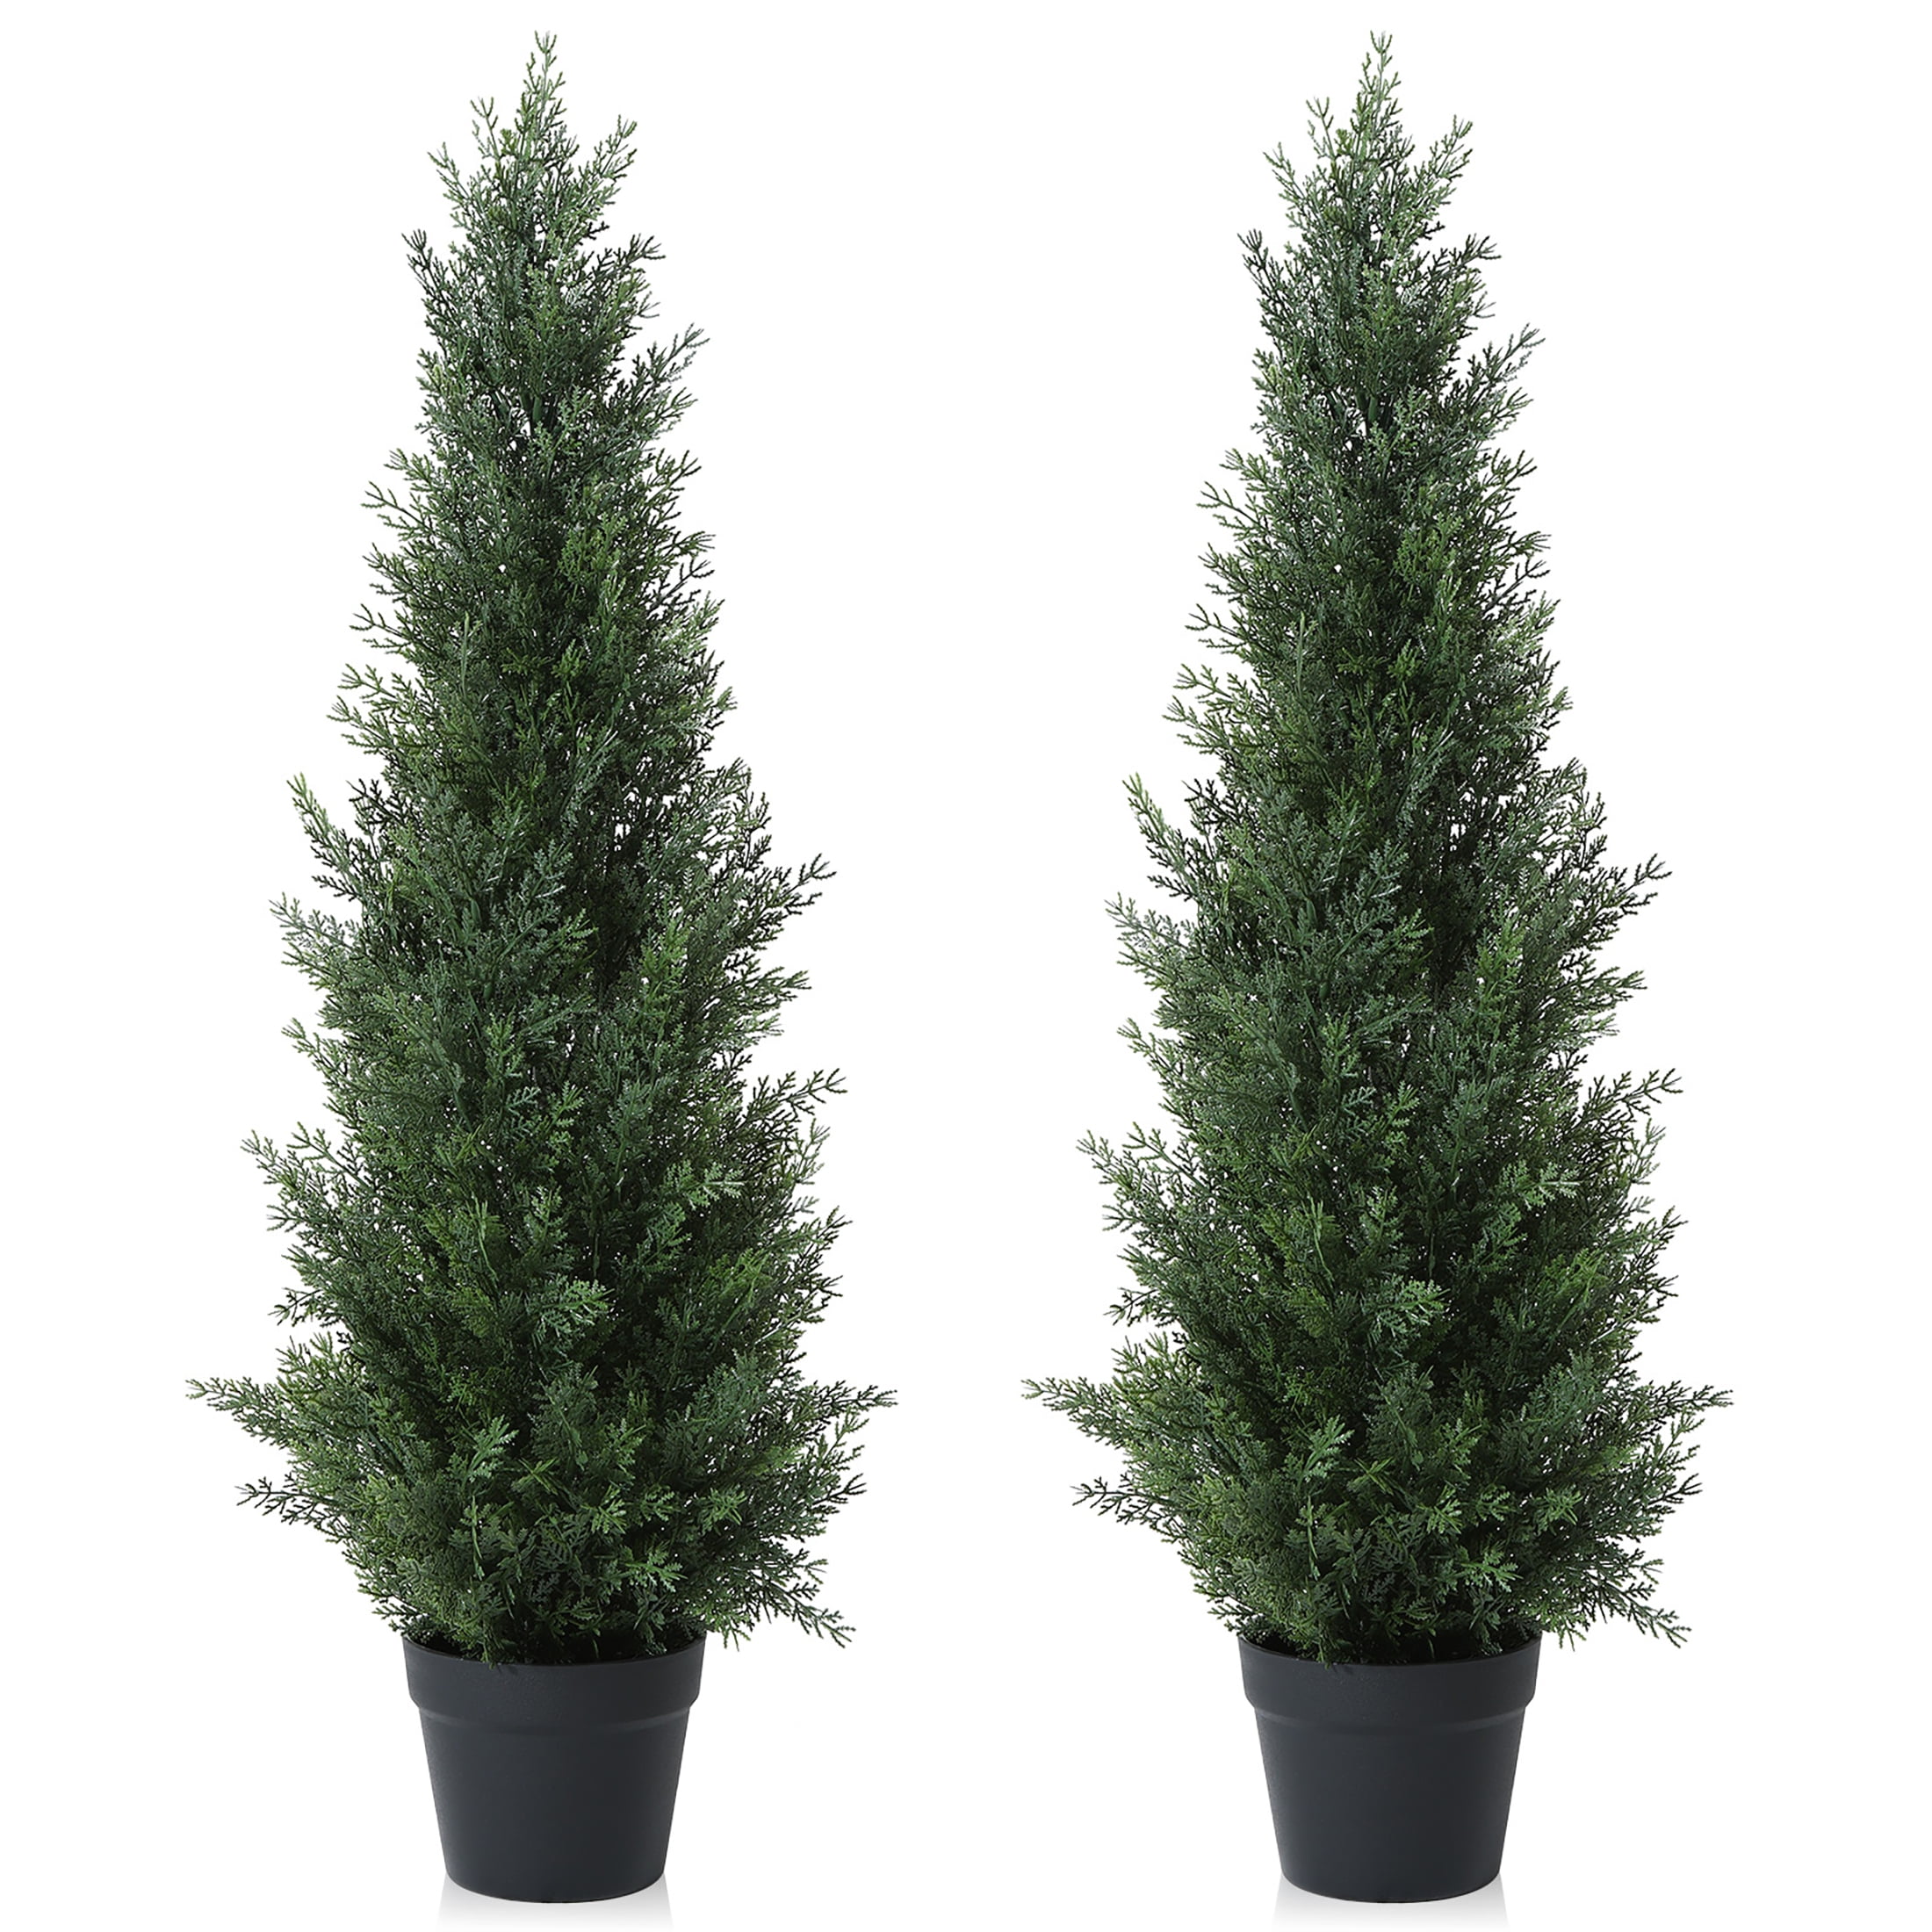 Artificial Christmas Tree 2 Pack 3 ft Outdoor Artificial Topiary Cedar ...